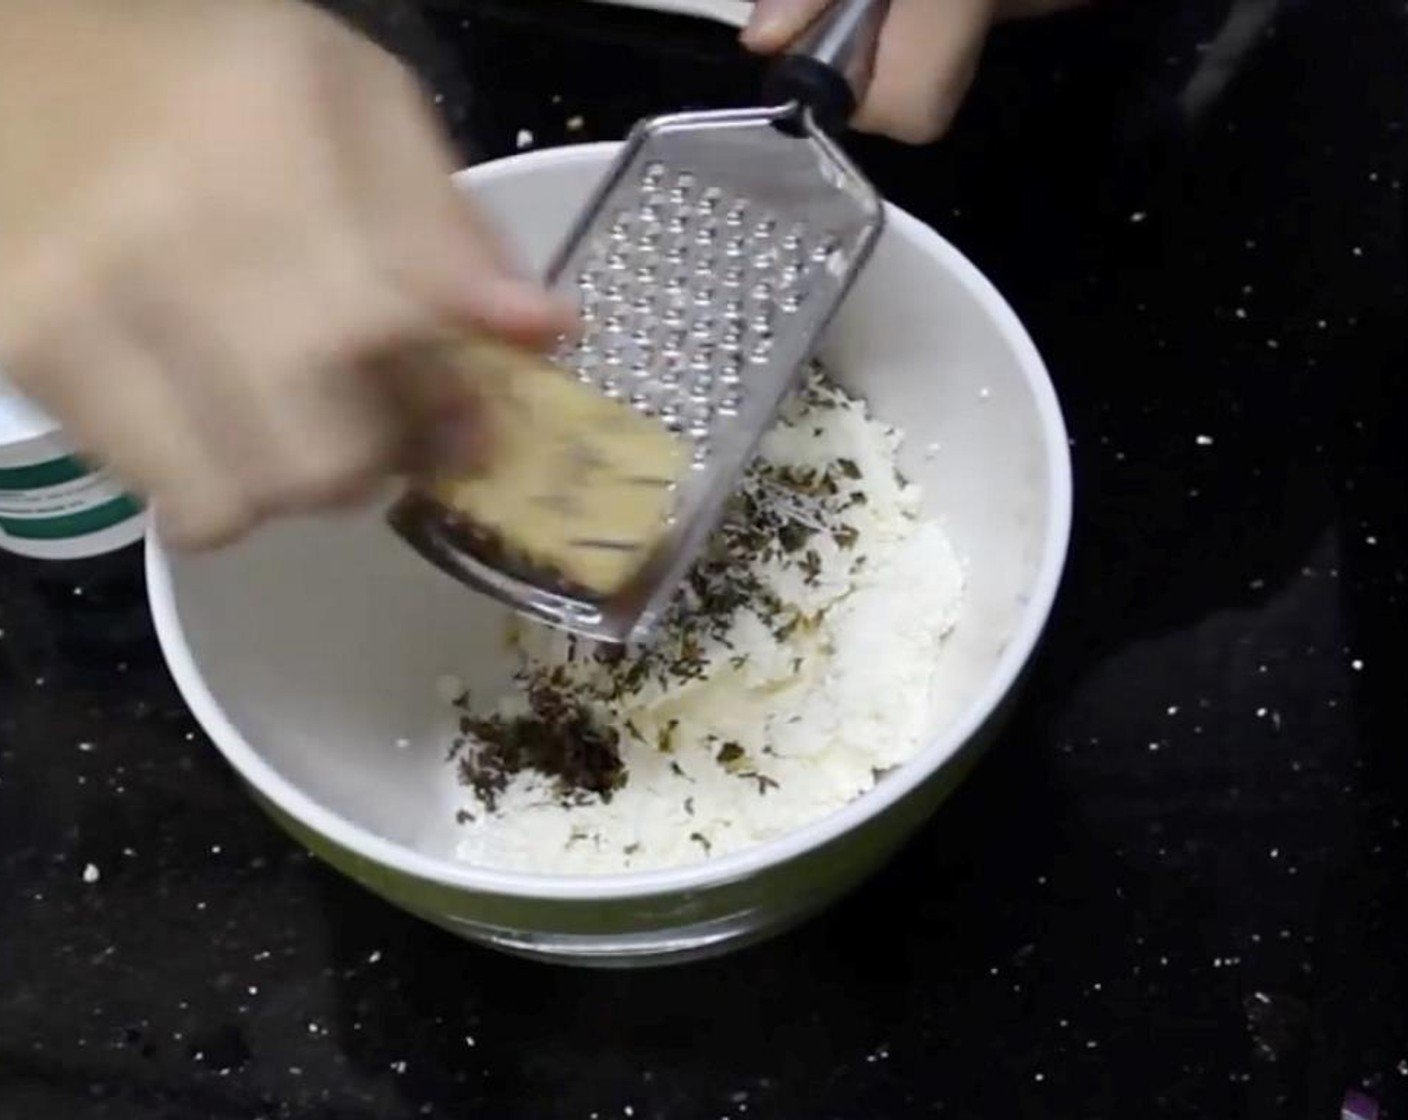 step 13 To make the cheese mixture, in a small bowl, add Cottage Cheese (1 cup), Dried Parsley (1 1/2 cups), and Grated Parmesan Cheese (1/4 cup) for topping. Mix evenly and set aside.